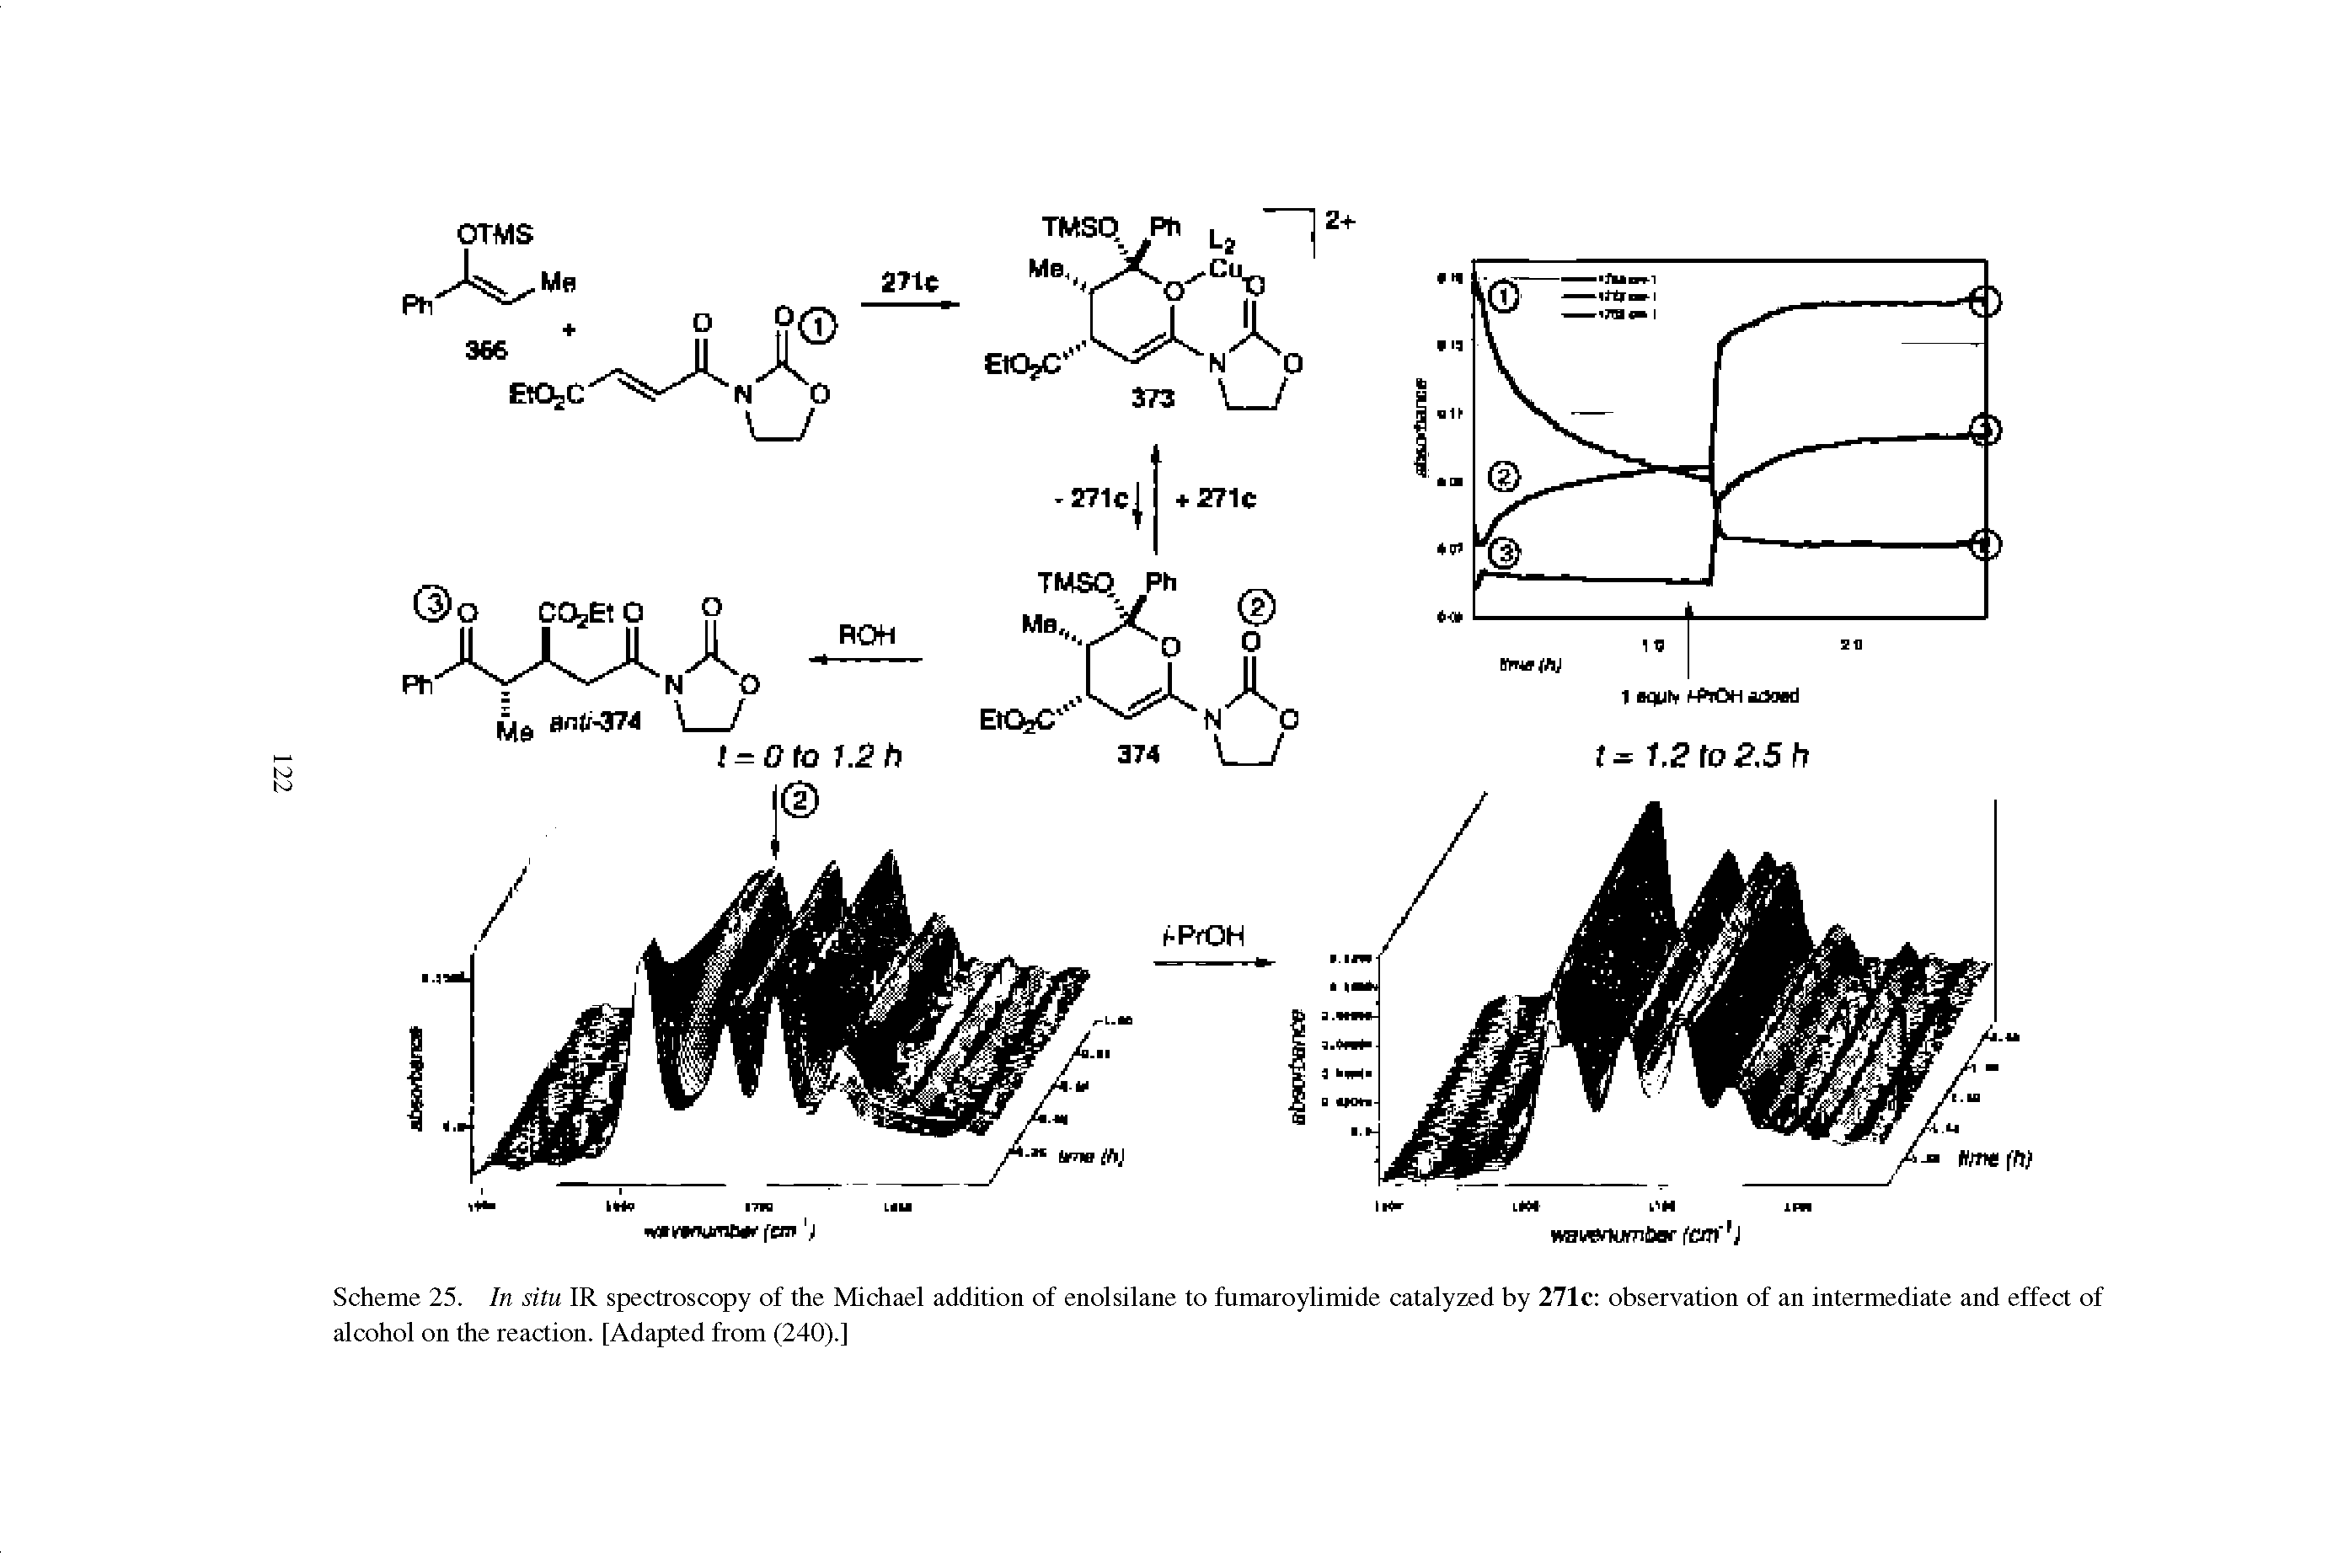 Scheme 25. In situ IR spectroscopy of the Michael addition of enolsilane to fumaroylimide catalyzed by 271c observation of an intermediate and effect of alcohol on the reaction. [Adapted from (240).]...